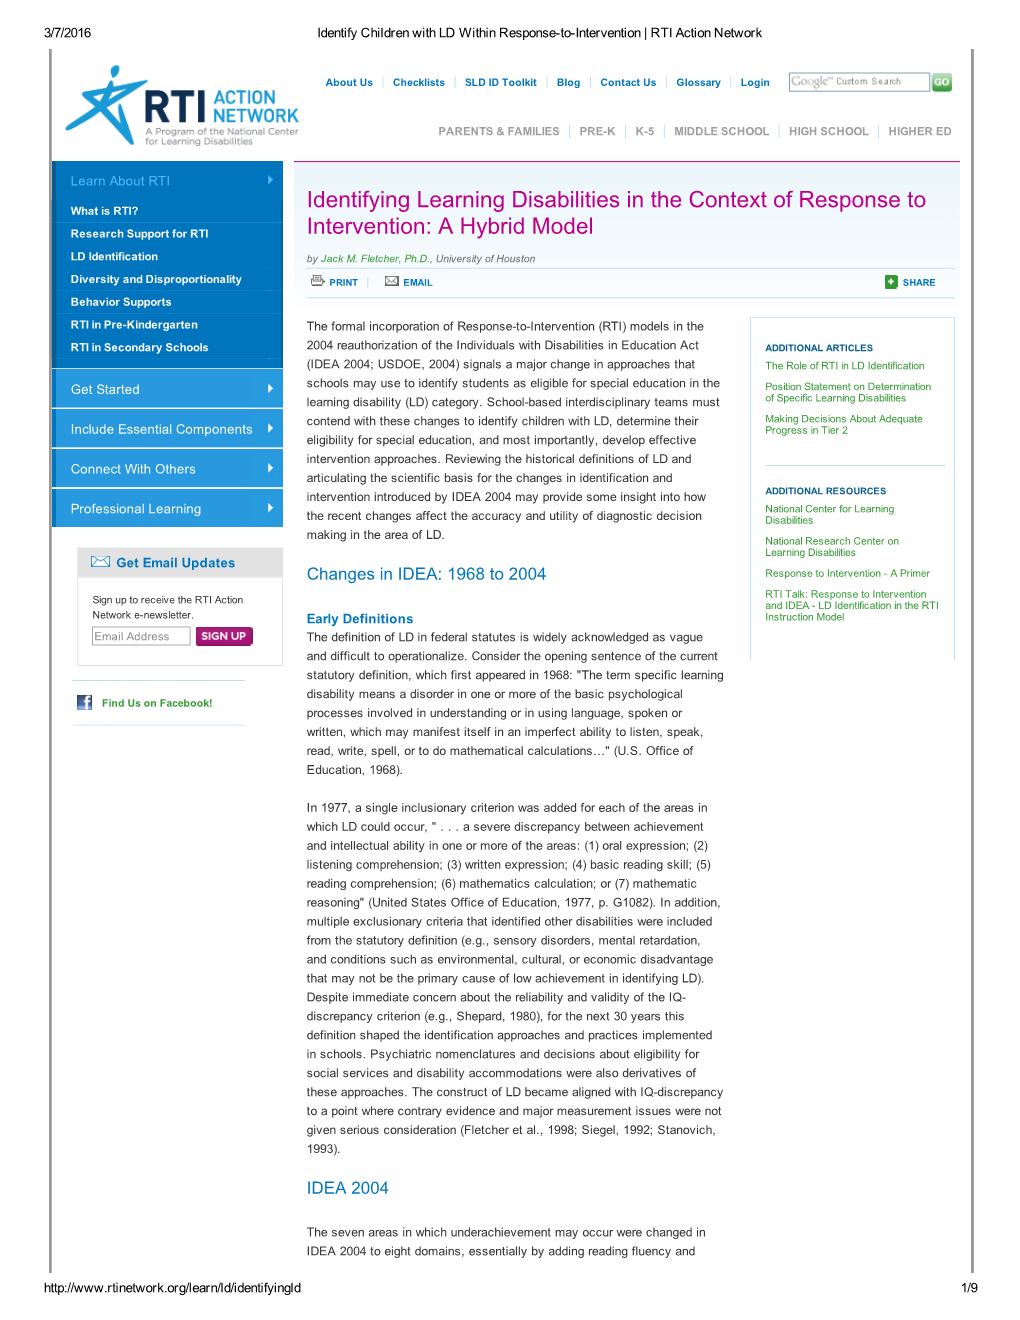 Identifying Learning Disabilities in the Context of Response to Intervention